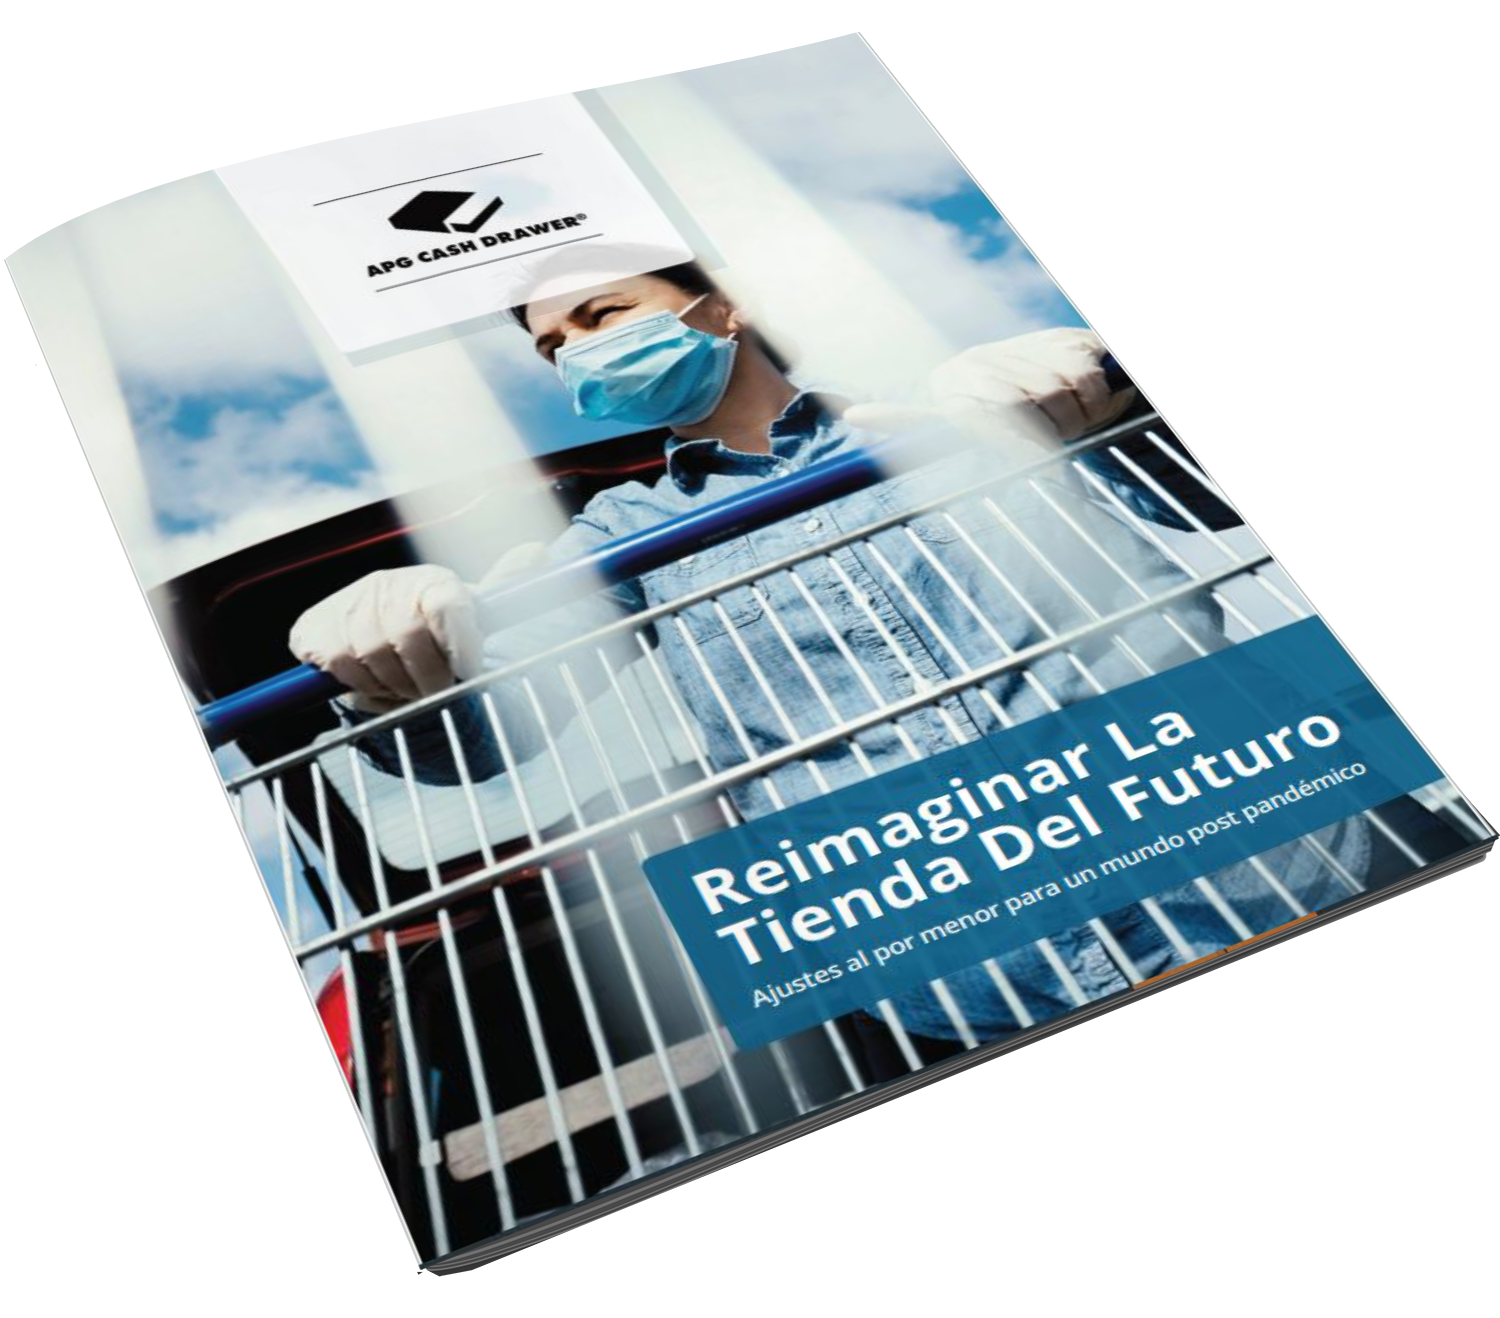 Reimagining The Store Of The Future SPANISH White Paper